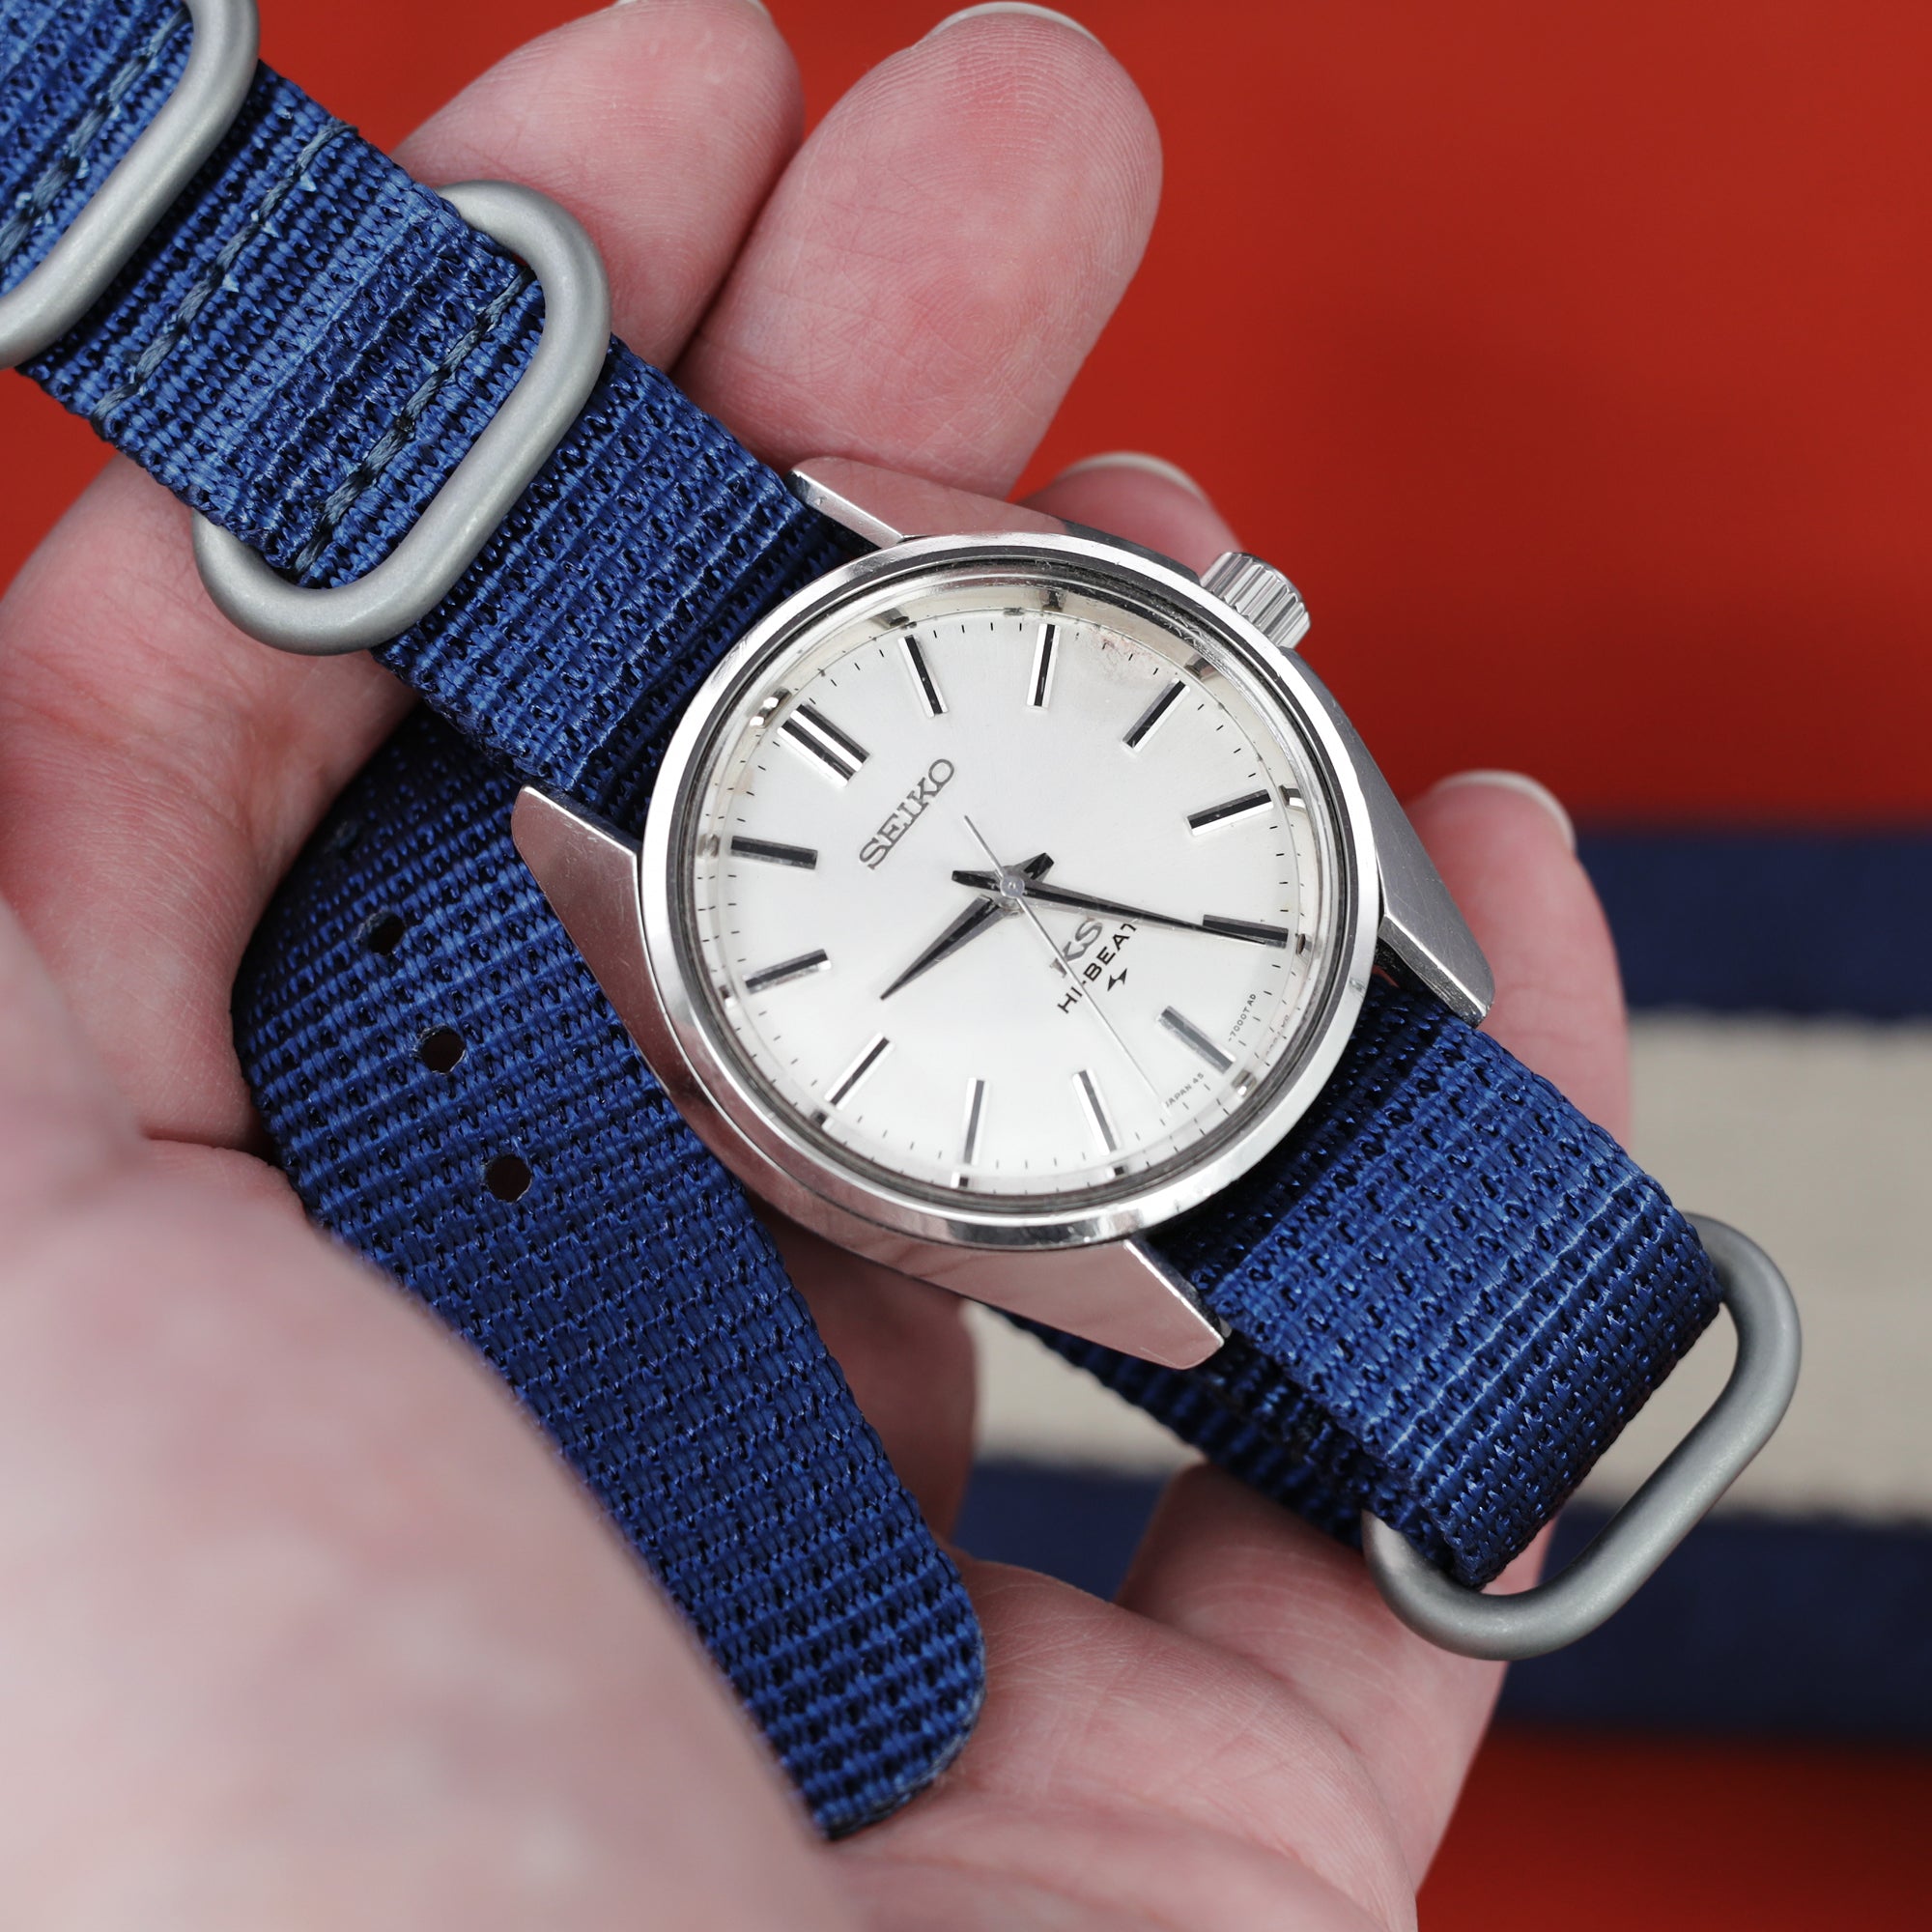 MiLTAT 18mm 3 Rings Zulu military watch strap 3D woven nylon armband - Navy Blue, Brushed Hardware